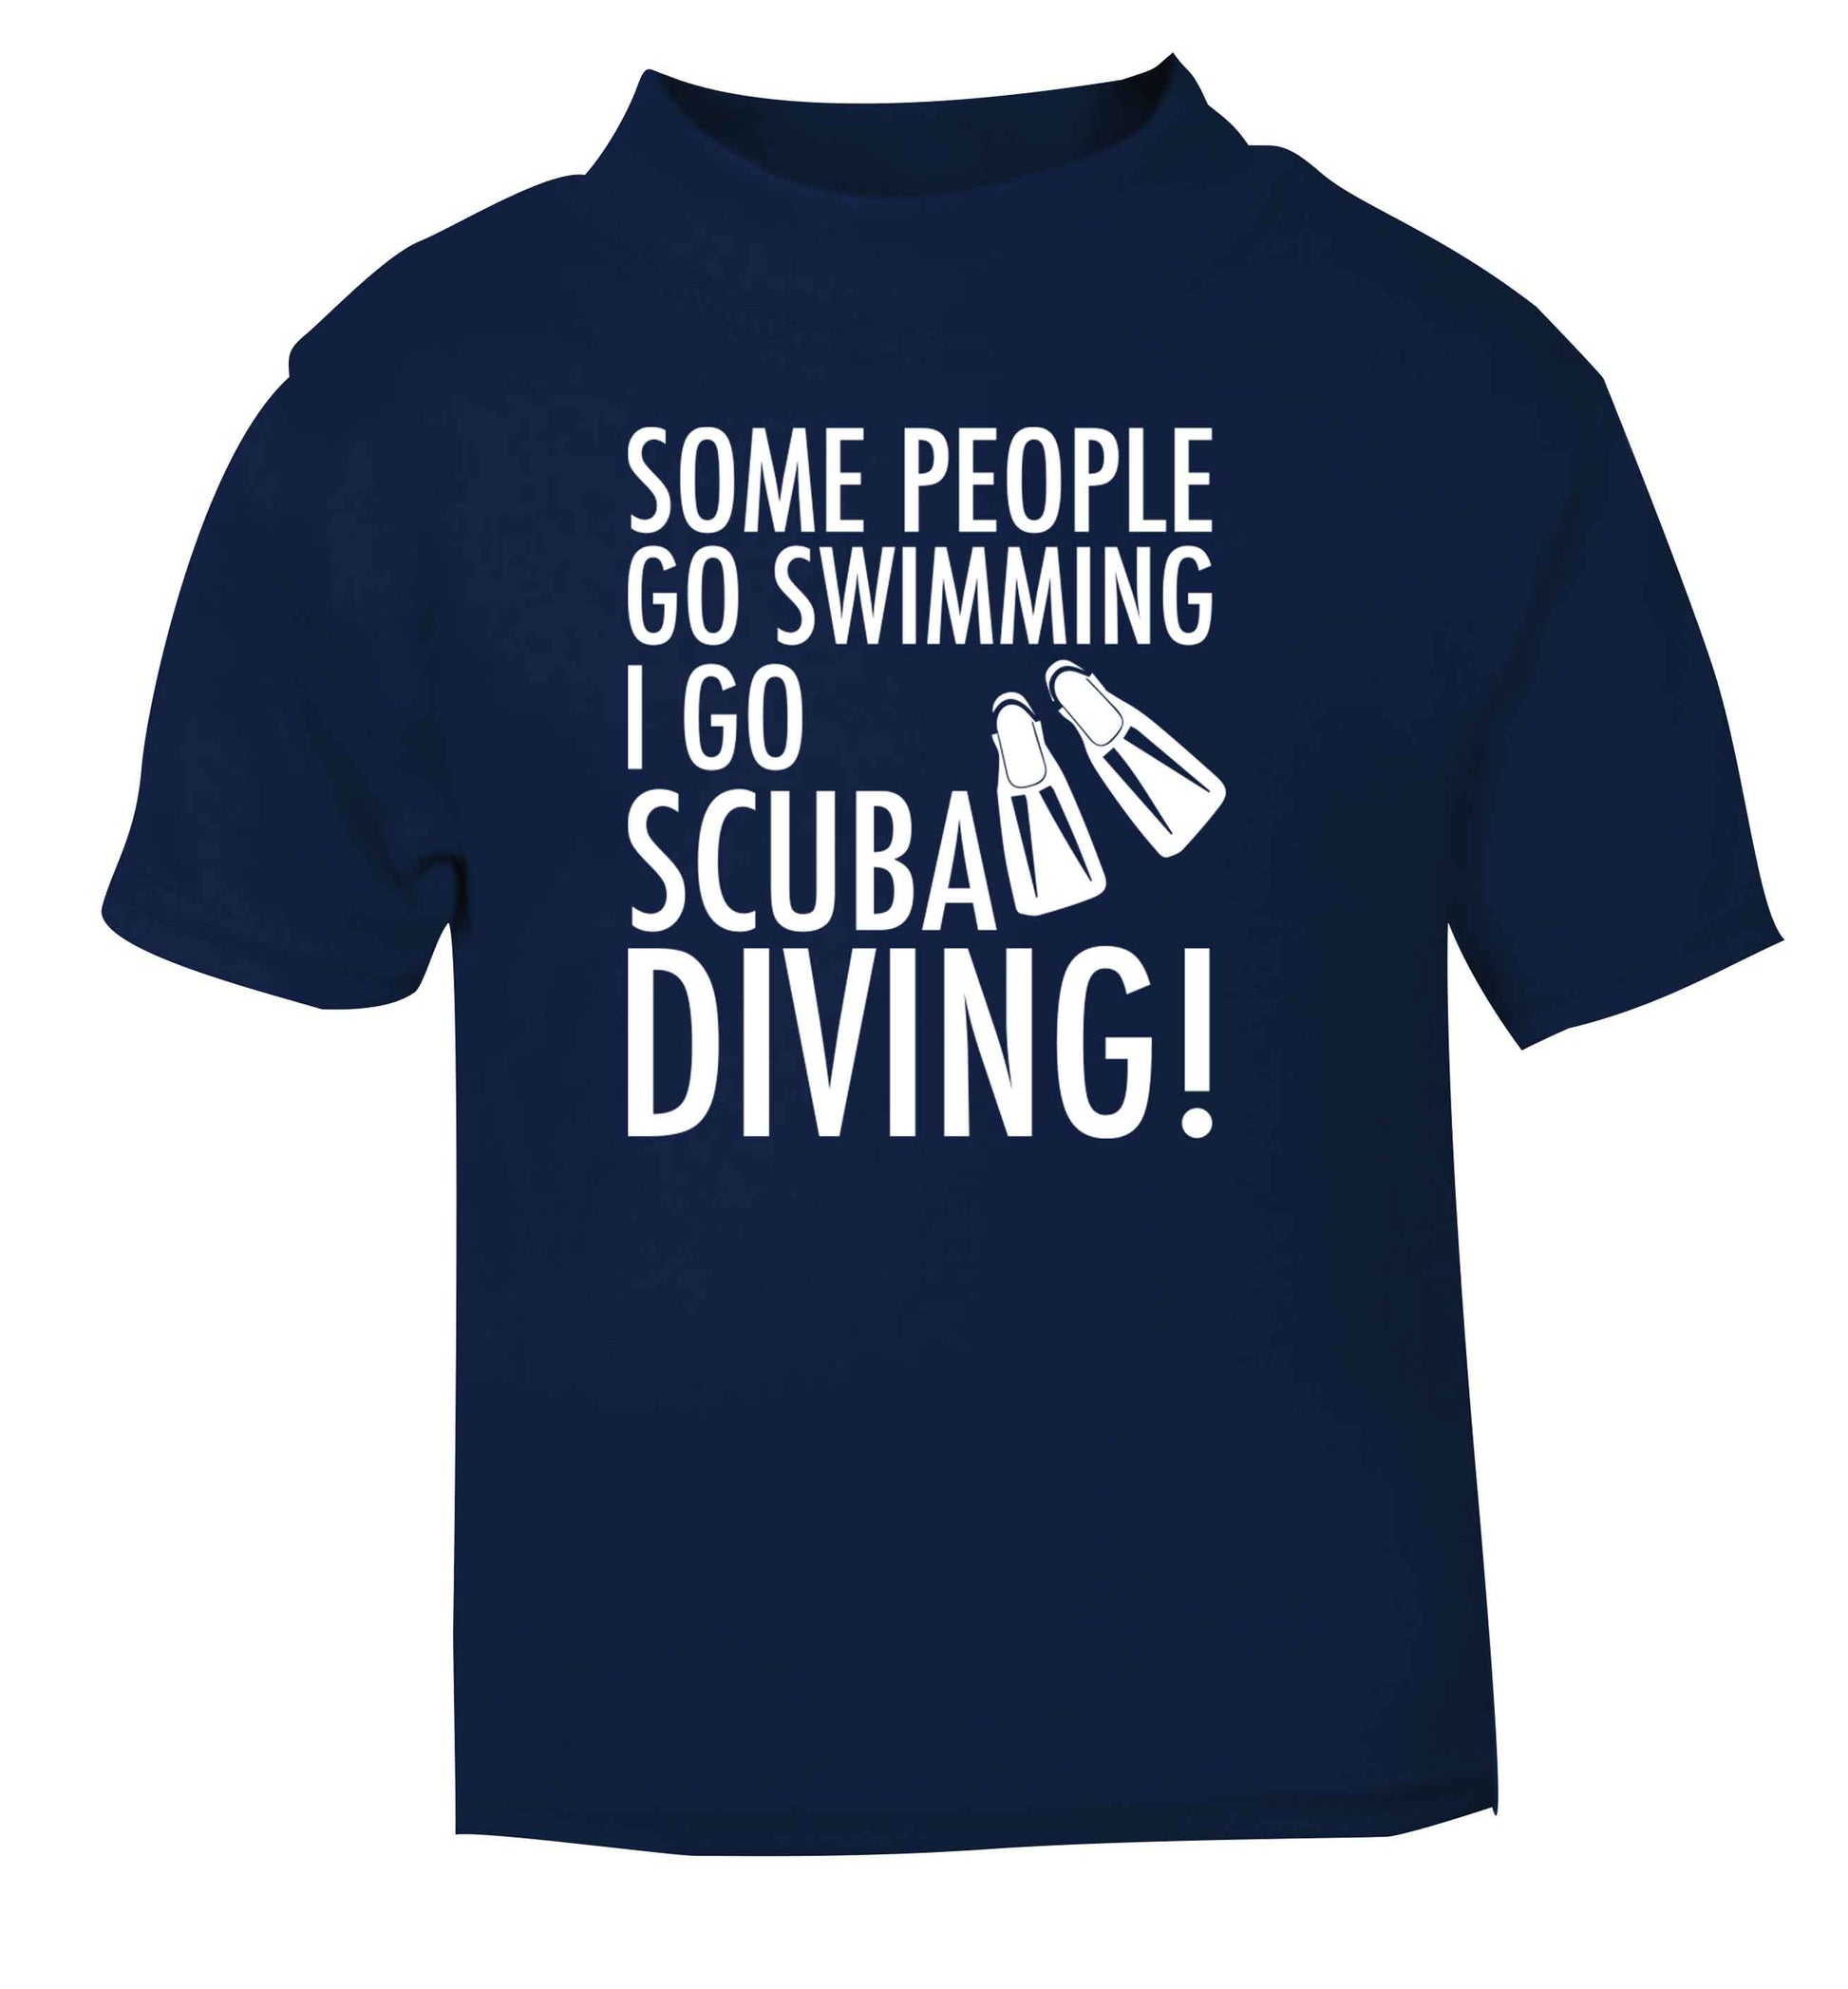 Some people go swimming I go scuba diving! navy Baby Toddler Tshirt 2 Years